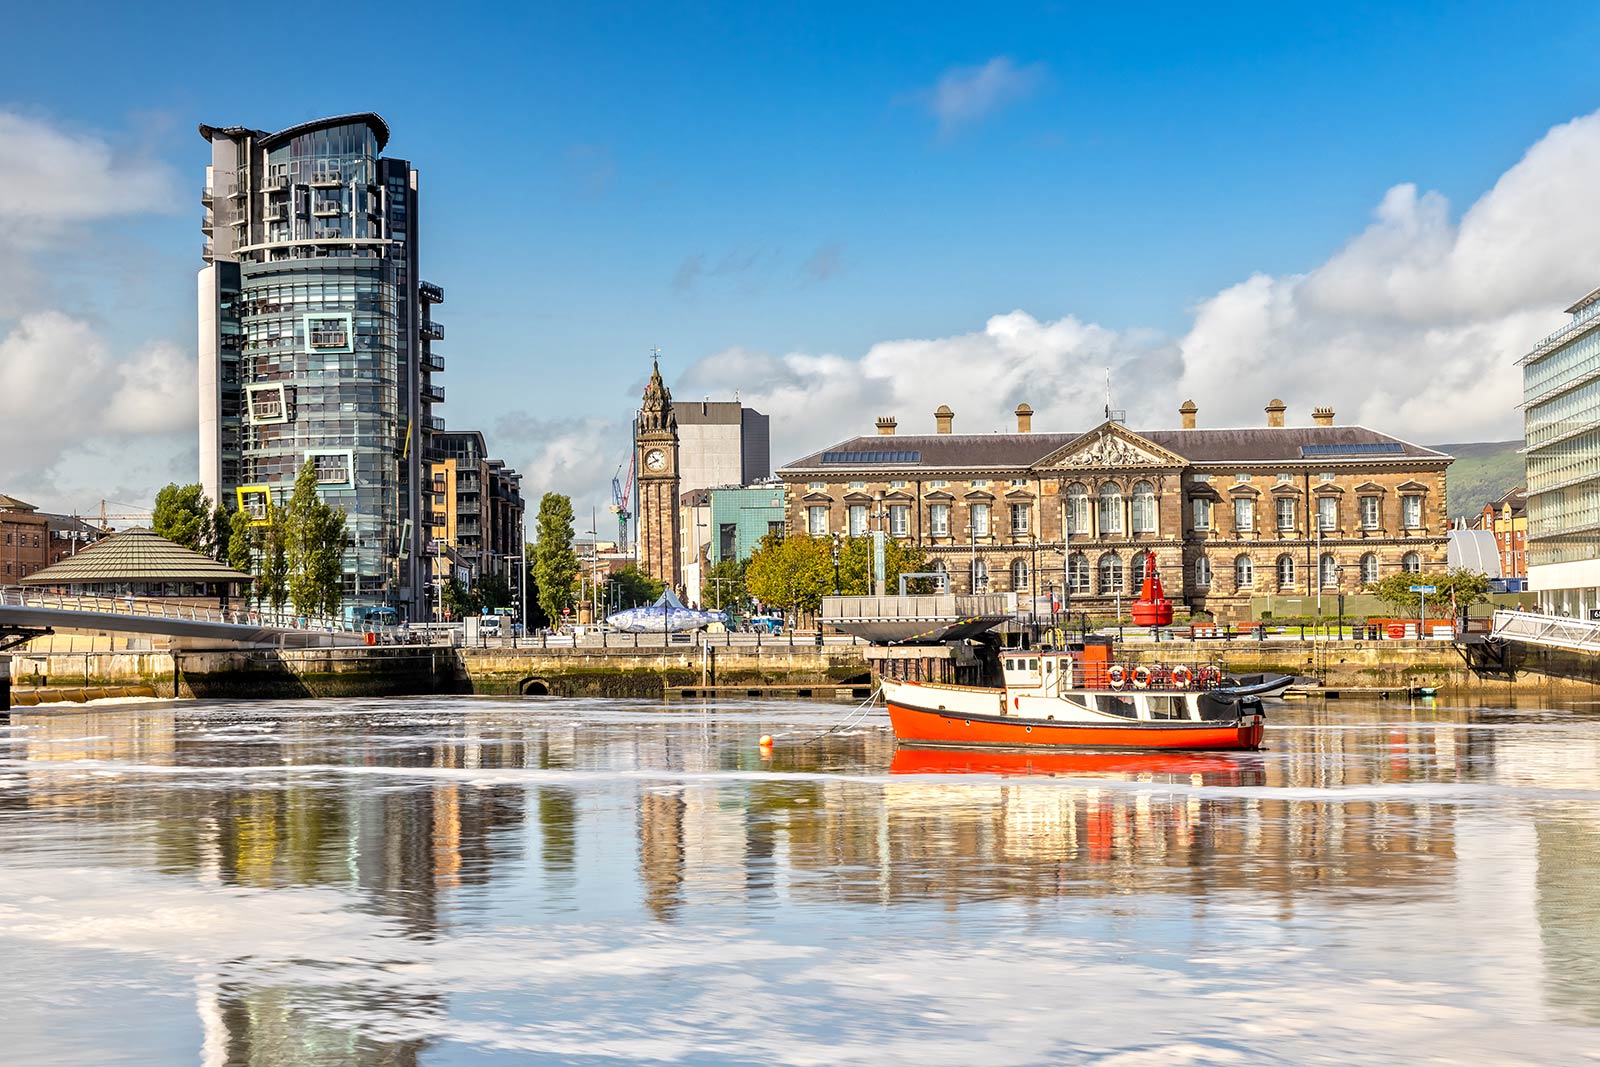 The Custom House and Lagan River in Belfast, Northern Ireland. 24hrs itinerary for Belfast, drinks and petrol bombs